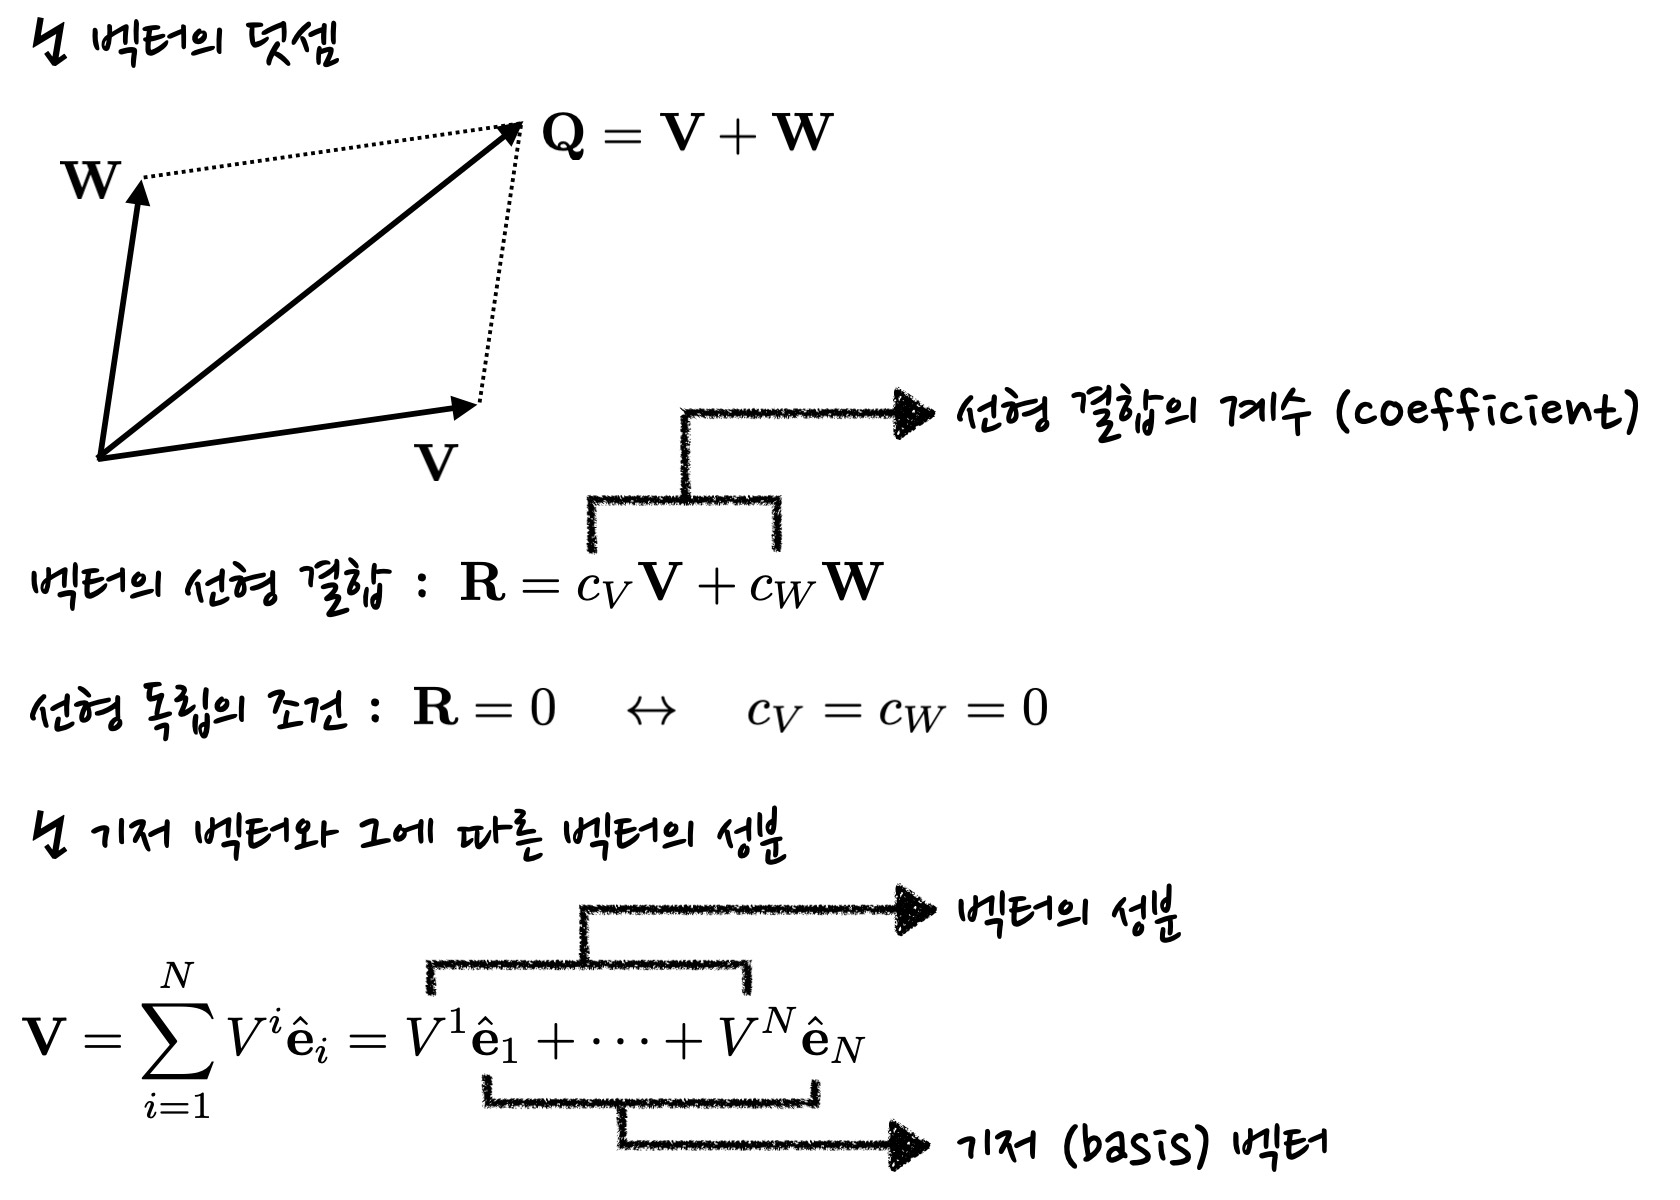 schematics of addition of vectors. It also shows the definitions of linear combination&#44; linear independence and vector decomposition with basis vectors.